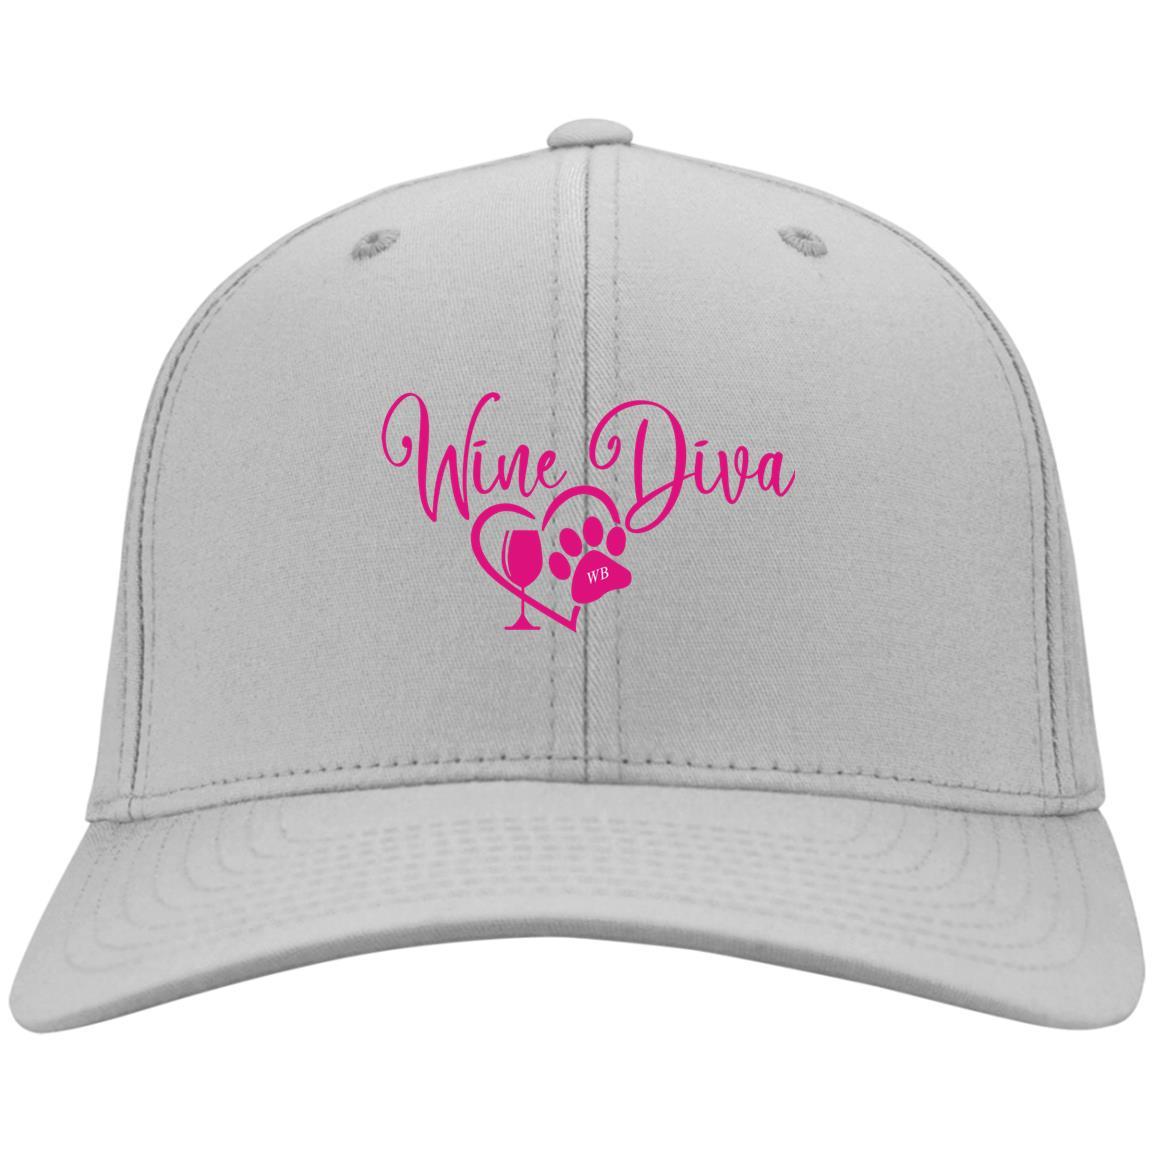 Hats Silver / One Size Winey Bitches Co "Wine Diva" Embroidered Twill Cap WineyBitchesCo